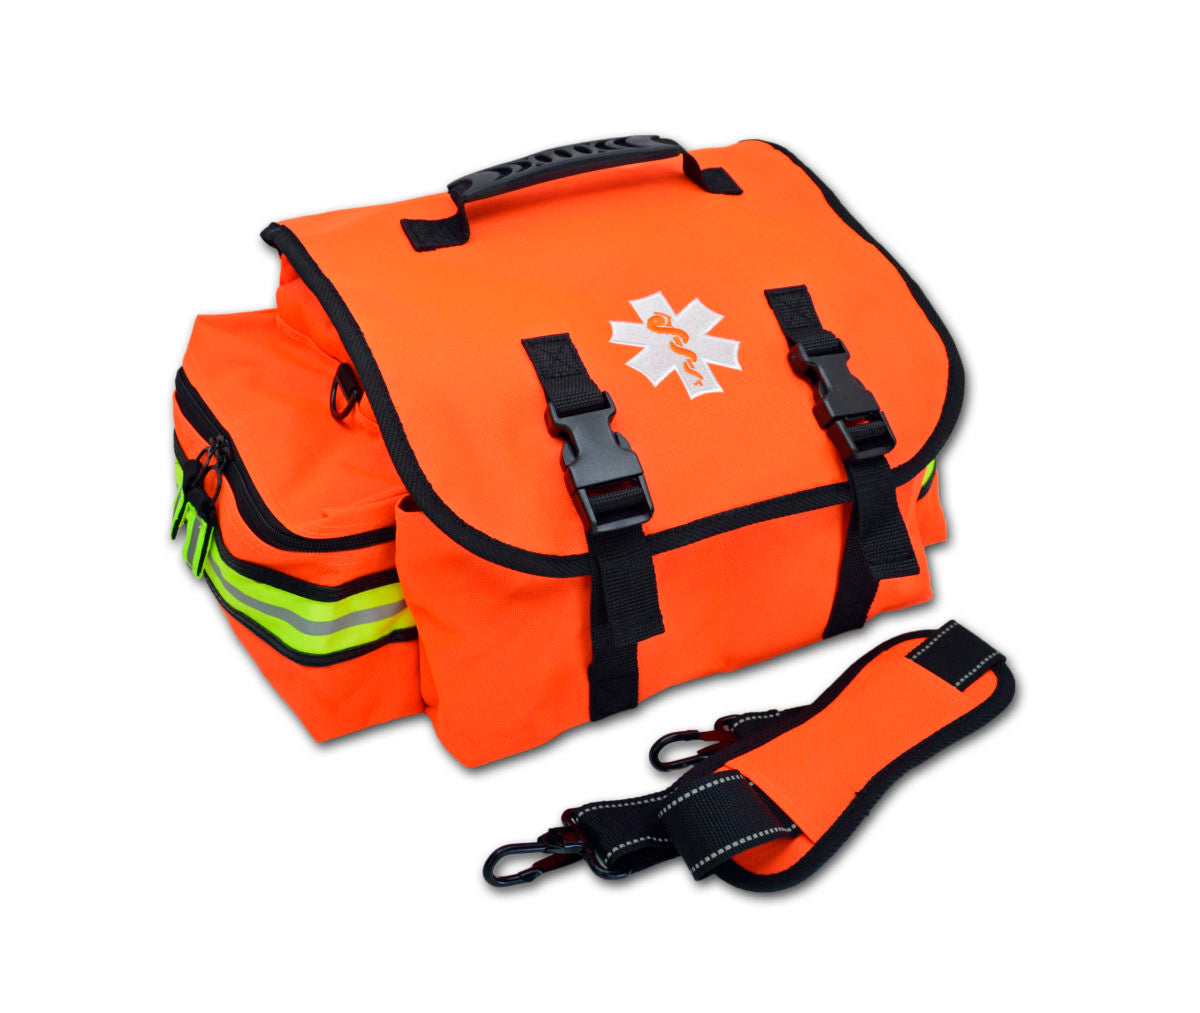 Lightning X Small First Responder Bag (LXMB20) | The Fire Center | The Fire Store | Store | FREE SHIPPING | Lightning X Products - LXMB20 Small EMT/Trauma Gear Bag In the event of a medical emergency, you need your first aid supplies to be organized so that you're ready to act without hesitation. We are constantly improving the design and function of our bags based on customer feedback from real users.